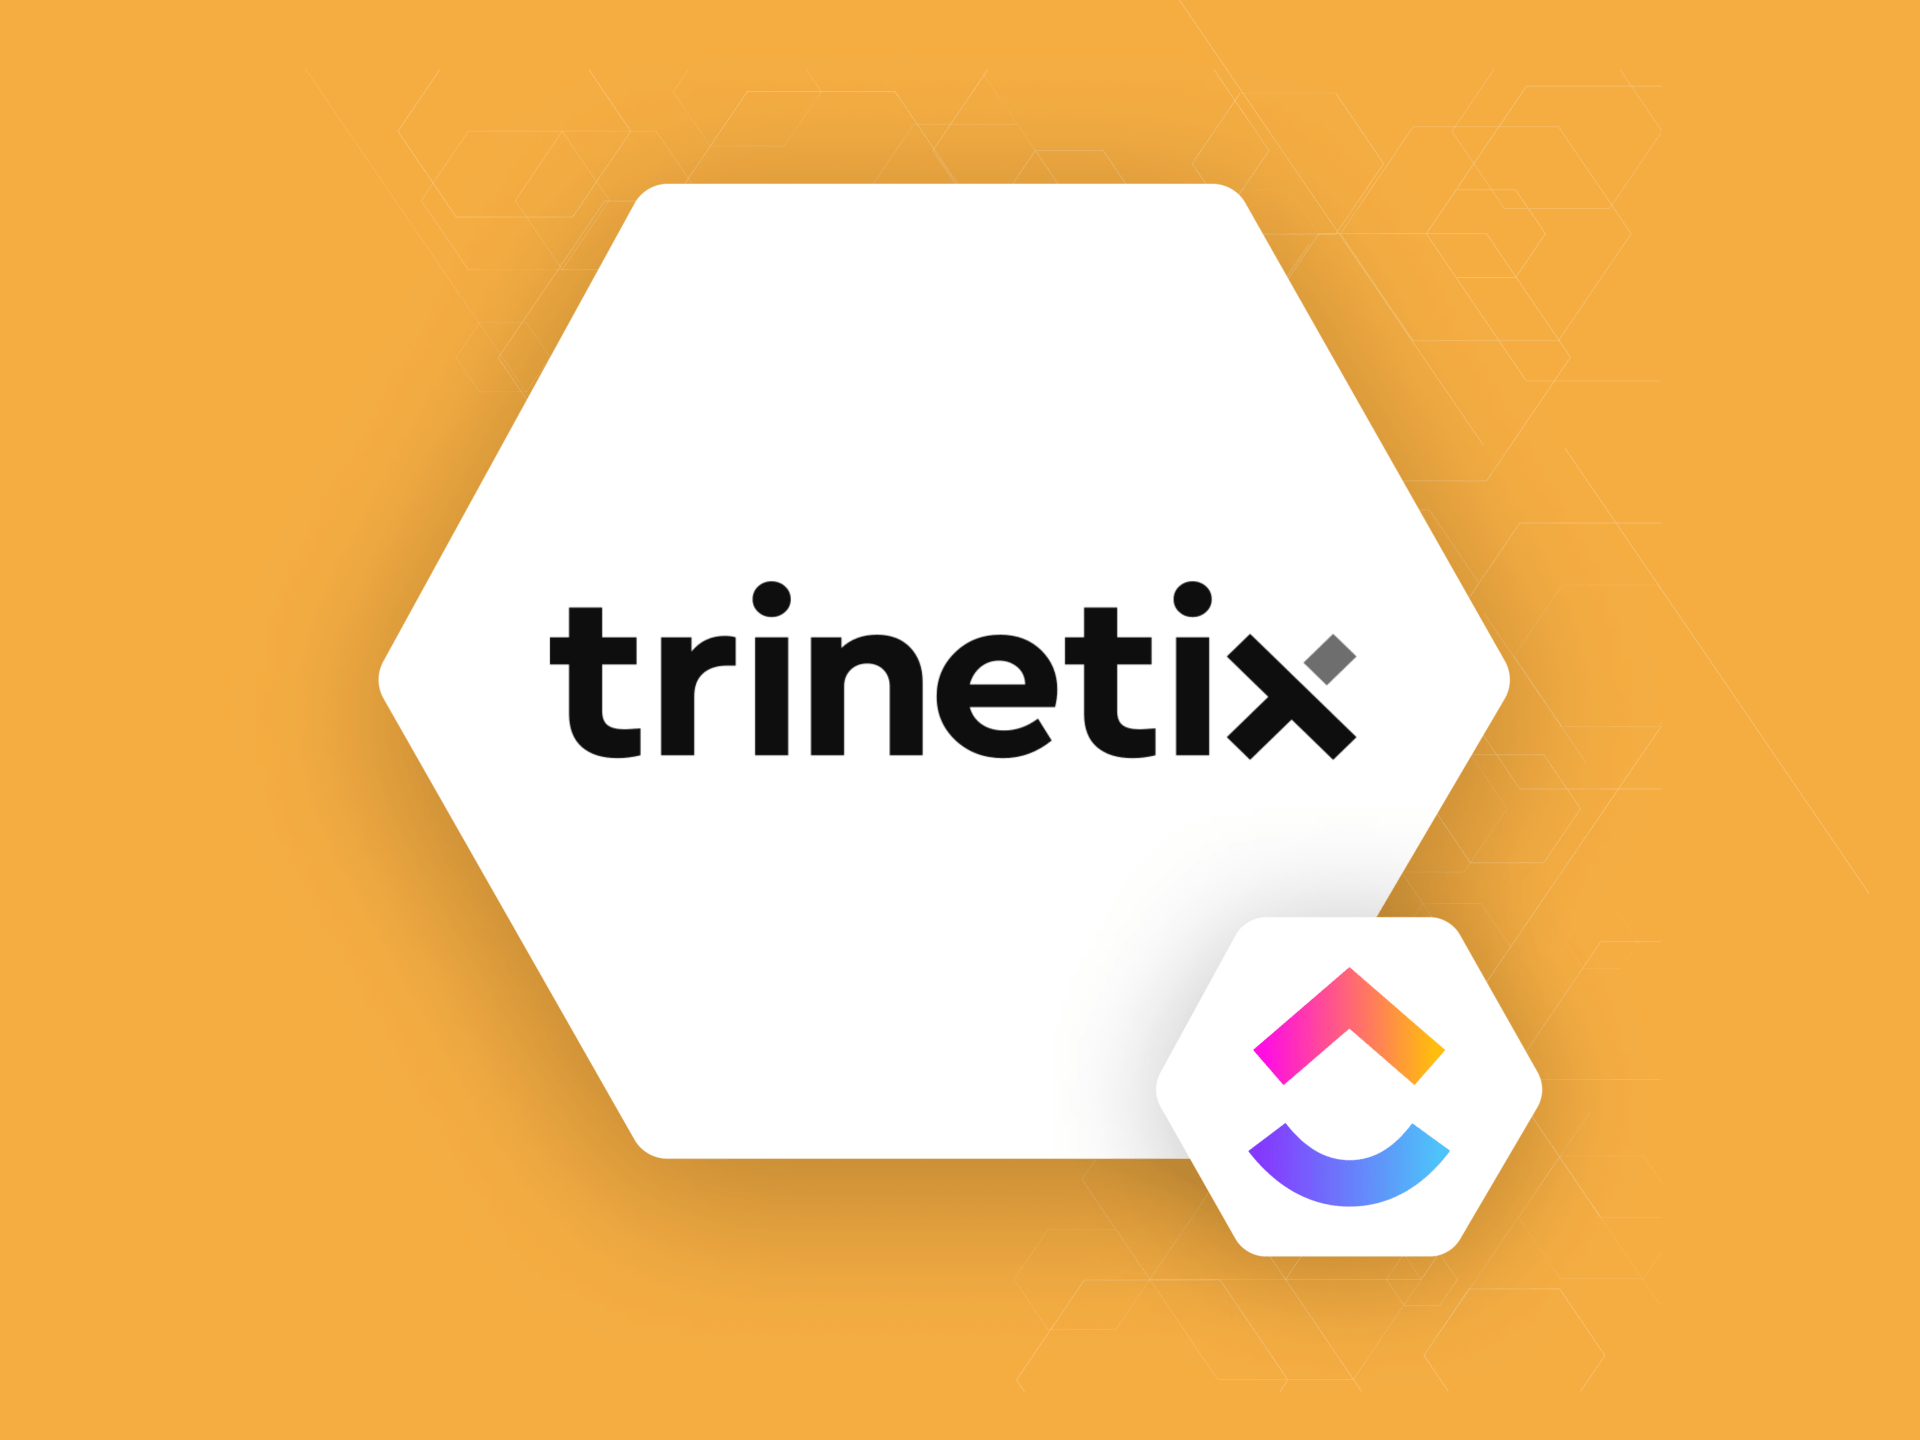 ClickUp Trinetix Onboarding and Career Development Plans